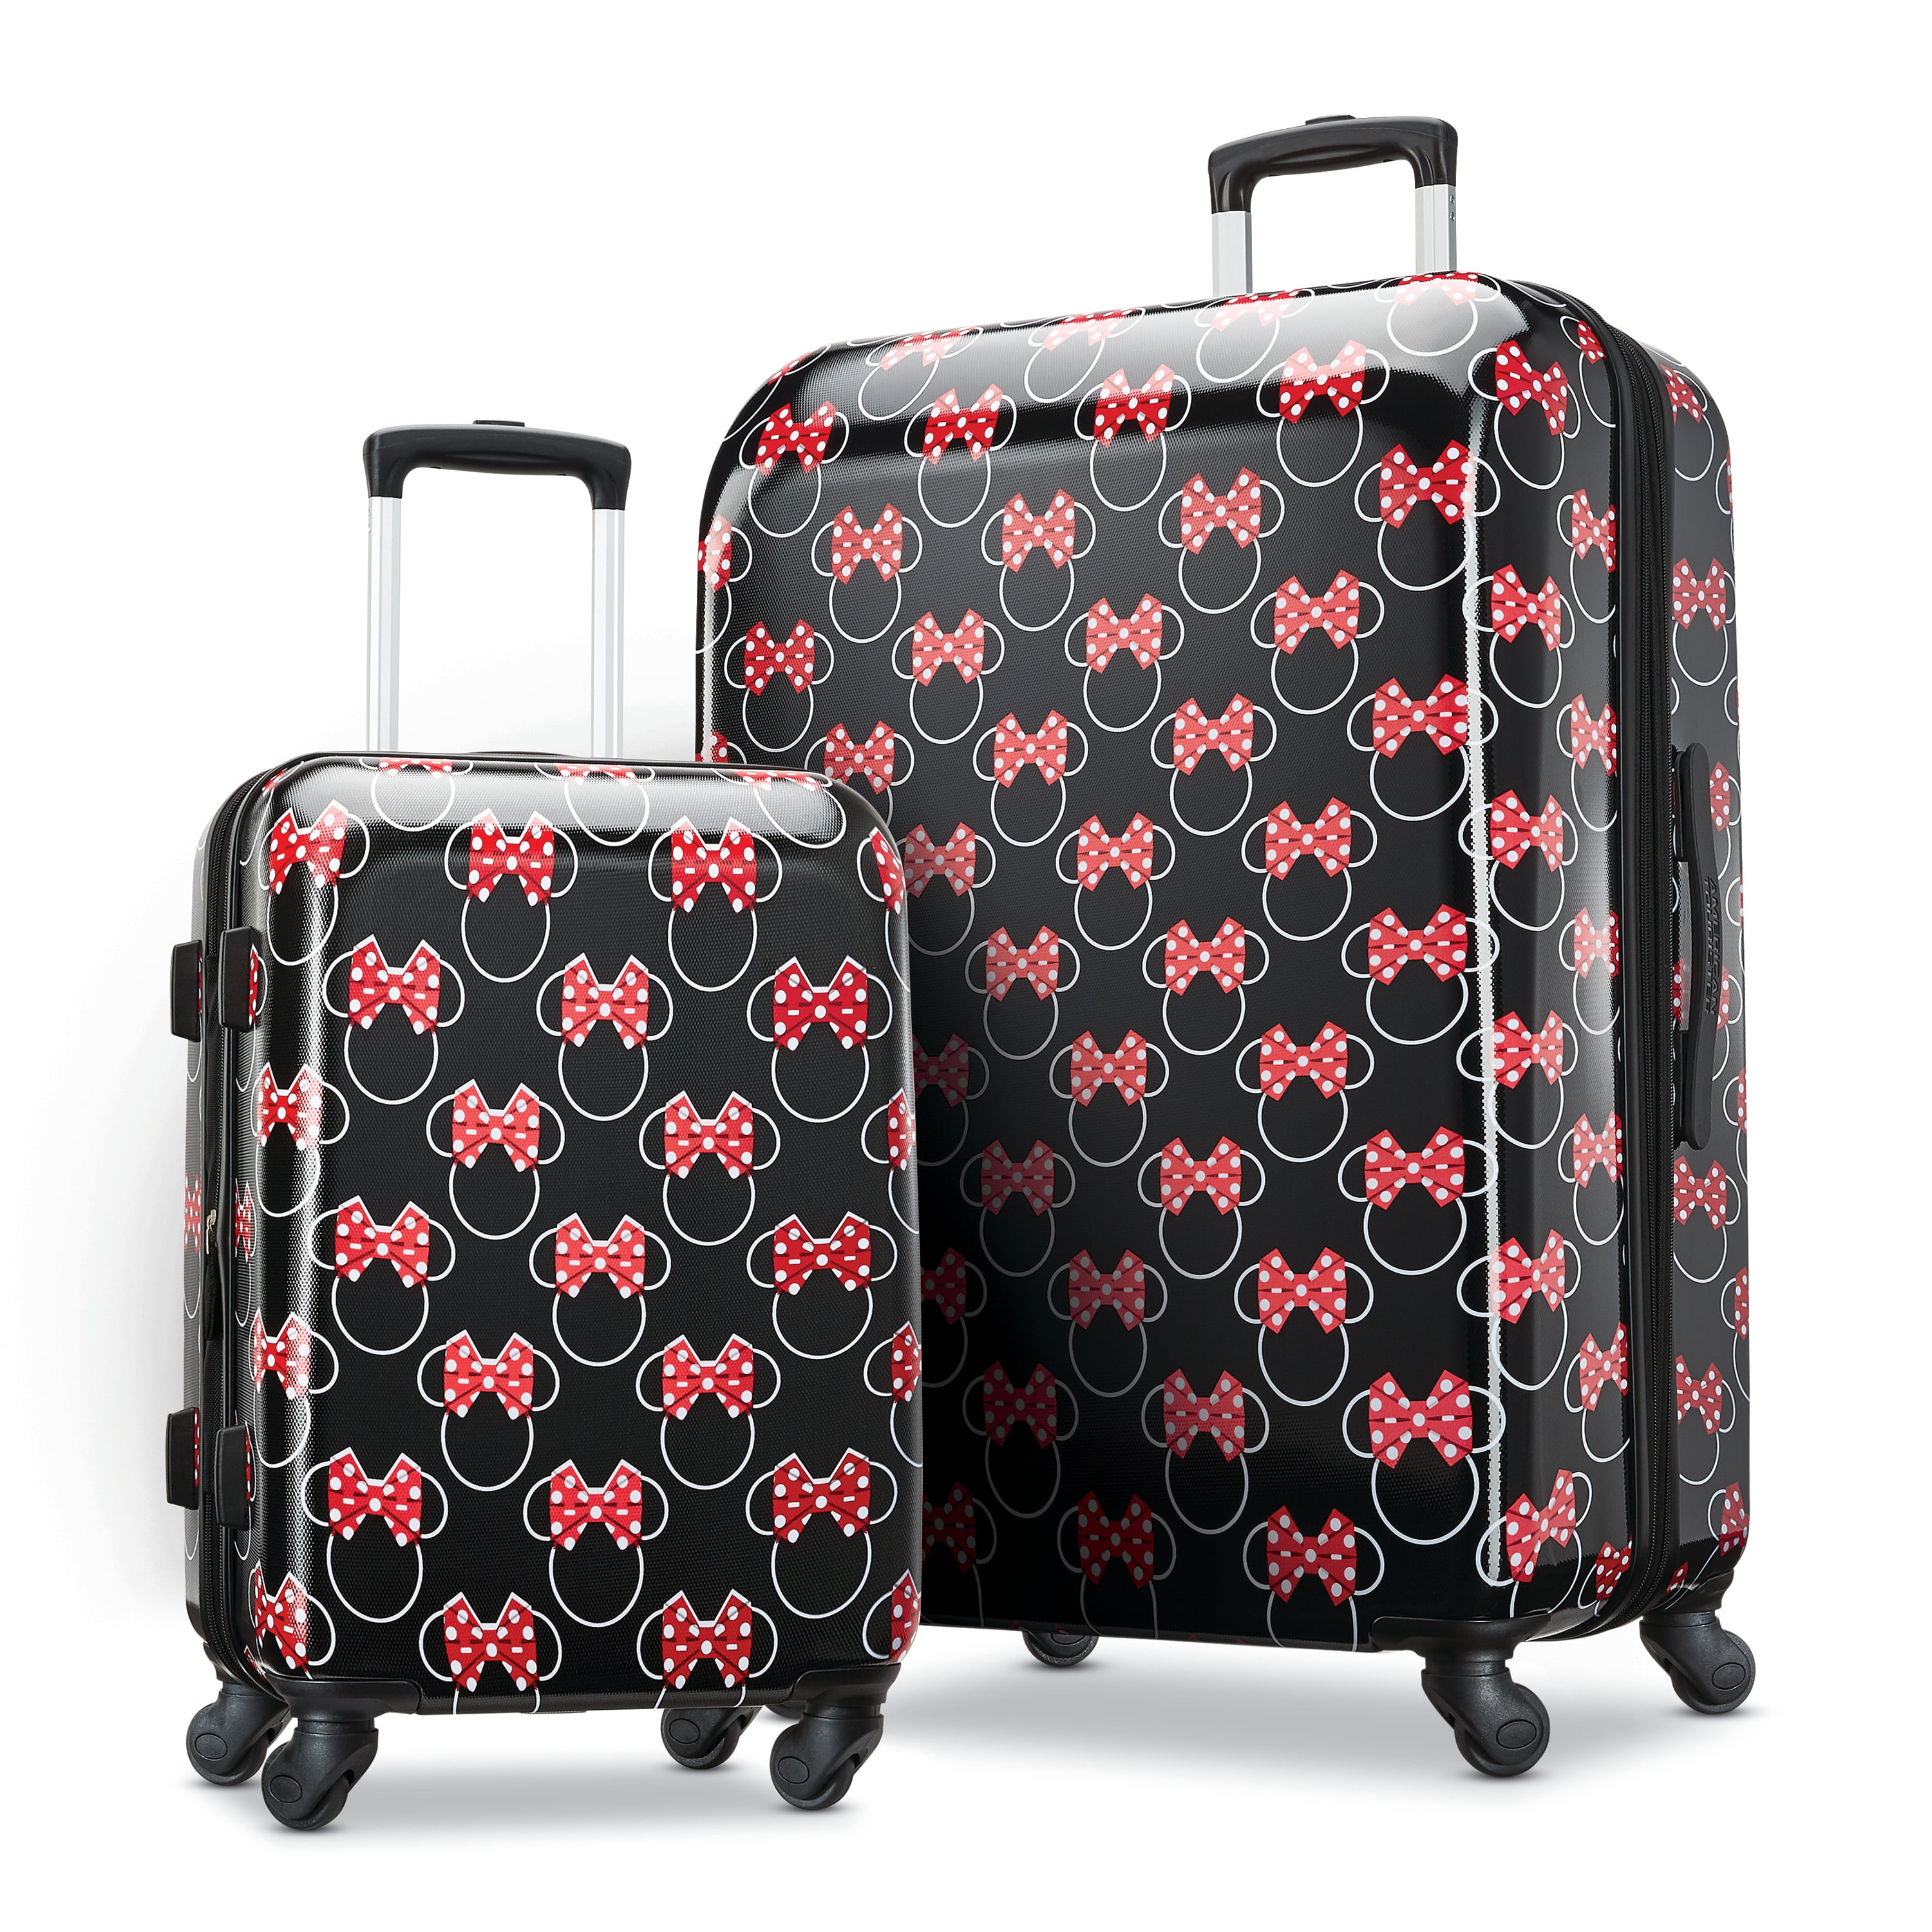 Oh Boy! We Review the Playful American Tourister Disney Luggage ...